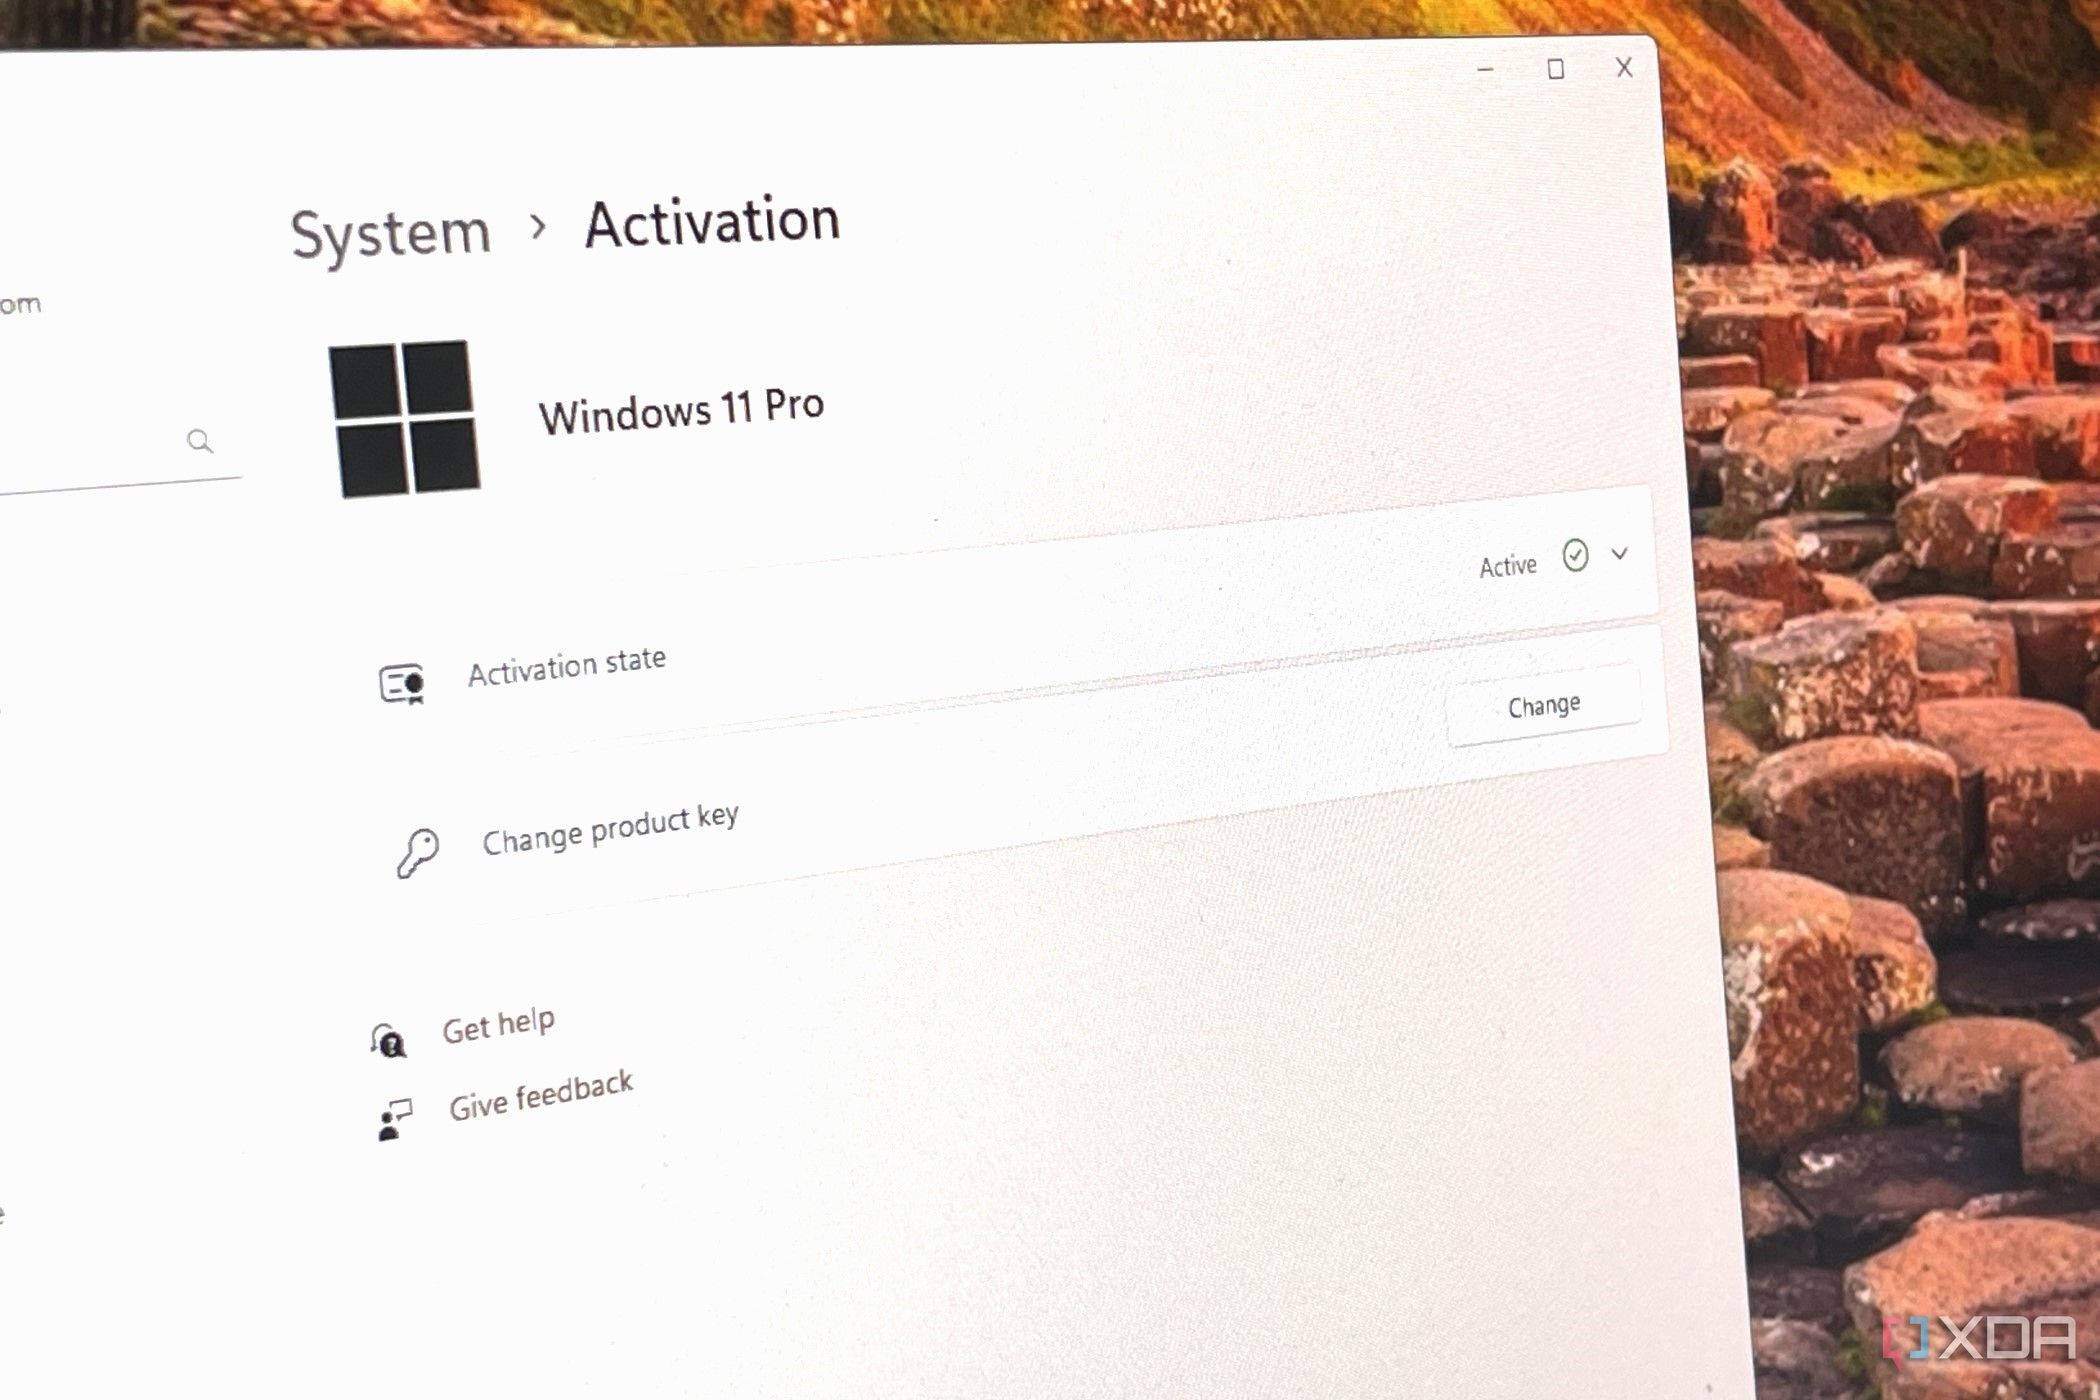 Windows 11 activation page